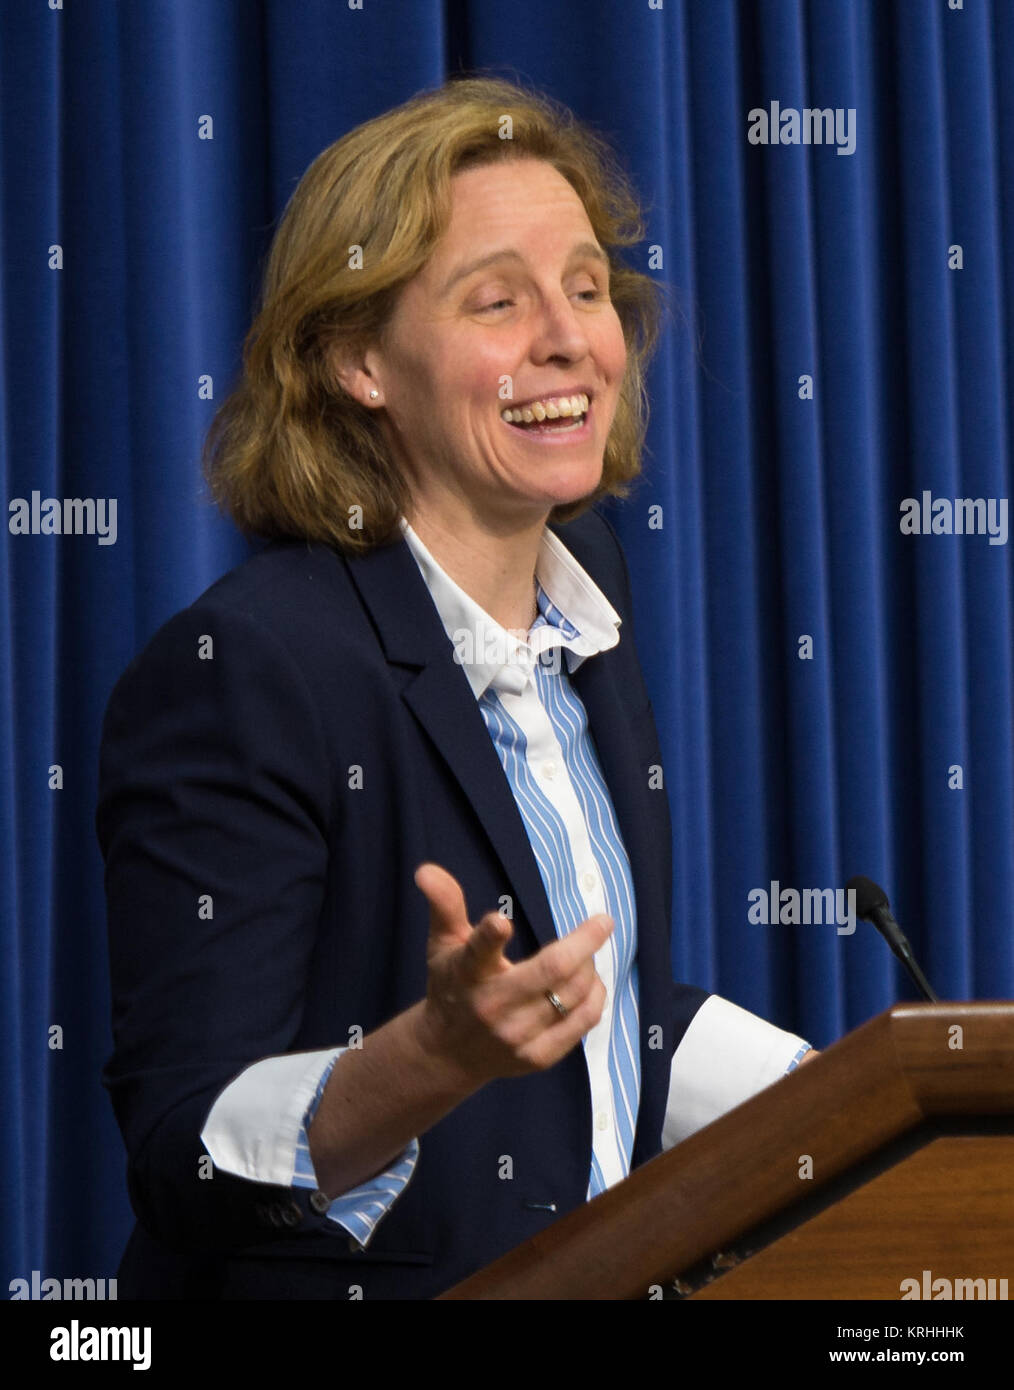 Megan Smith, Chief Technology Officer of the United States, speaks at the Young Women Empowering Communities: Champions of Change event on Tuesday, September 15, 2015 at the Eisenhower Executive Office Building in Washington, DC. The Champions of Change program was created by the White House to recognize 'individuals doing extraordinary things to empower and inspire members of their communities.' Photo Credit: (NASA/Aubrey Gemignani). Megan Smith in 2015 Stock Photo